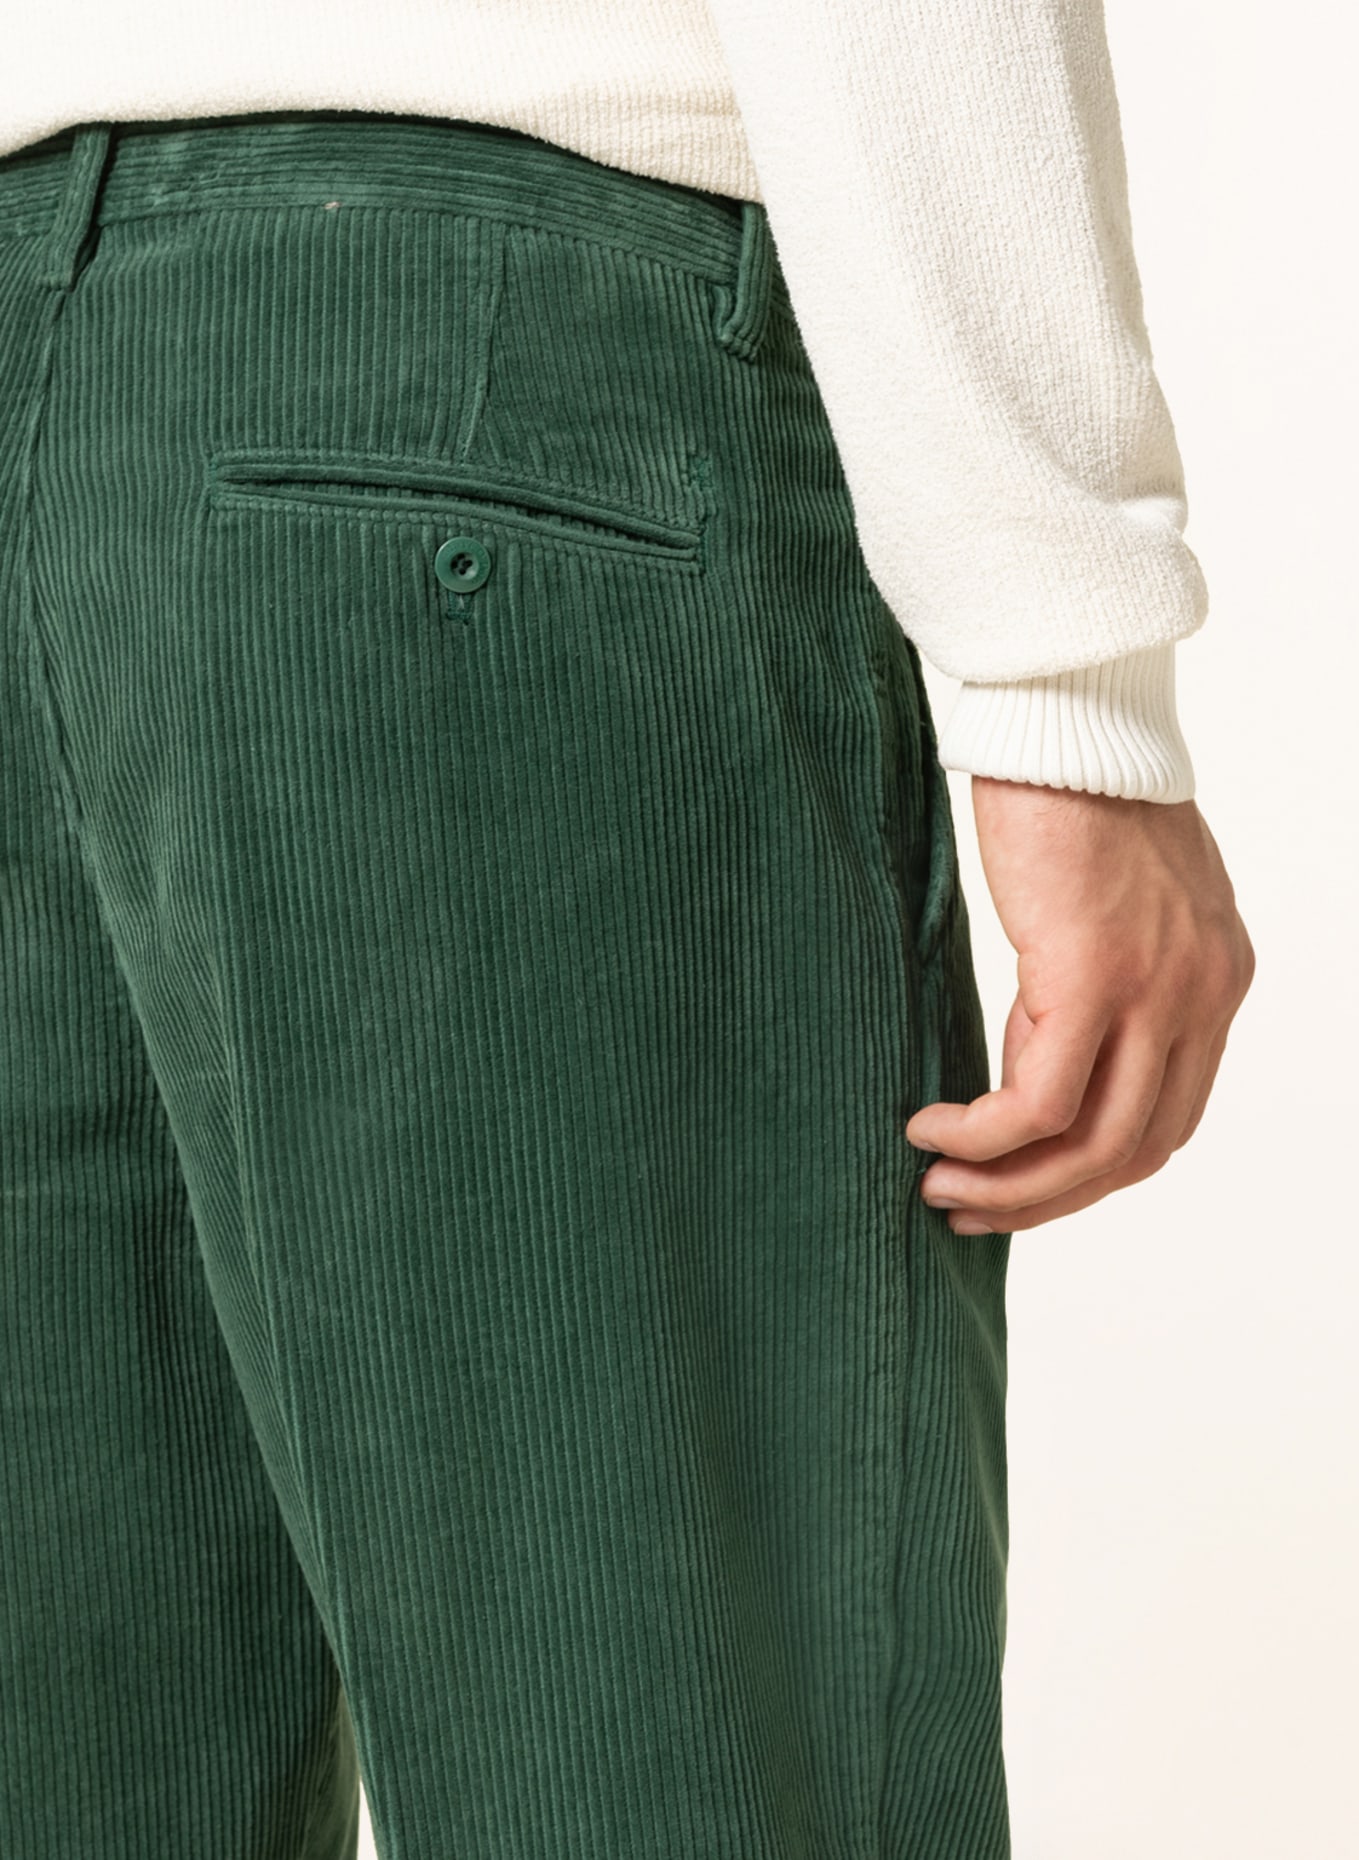 Rare Original 1937 Dated British Green Corduroy Trousers by L Fulton